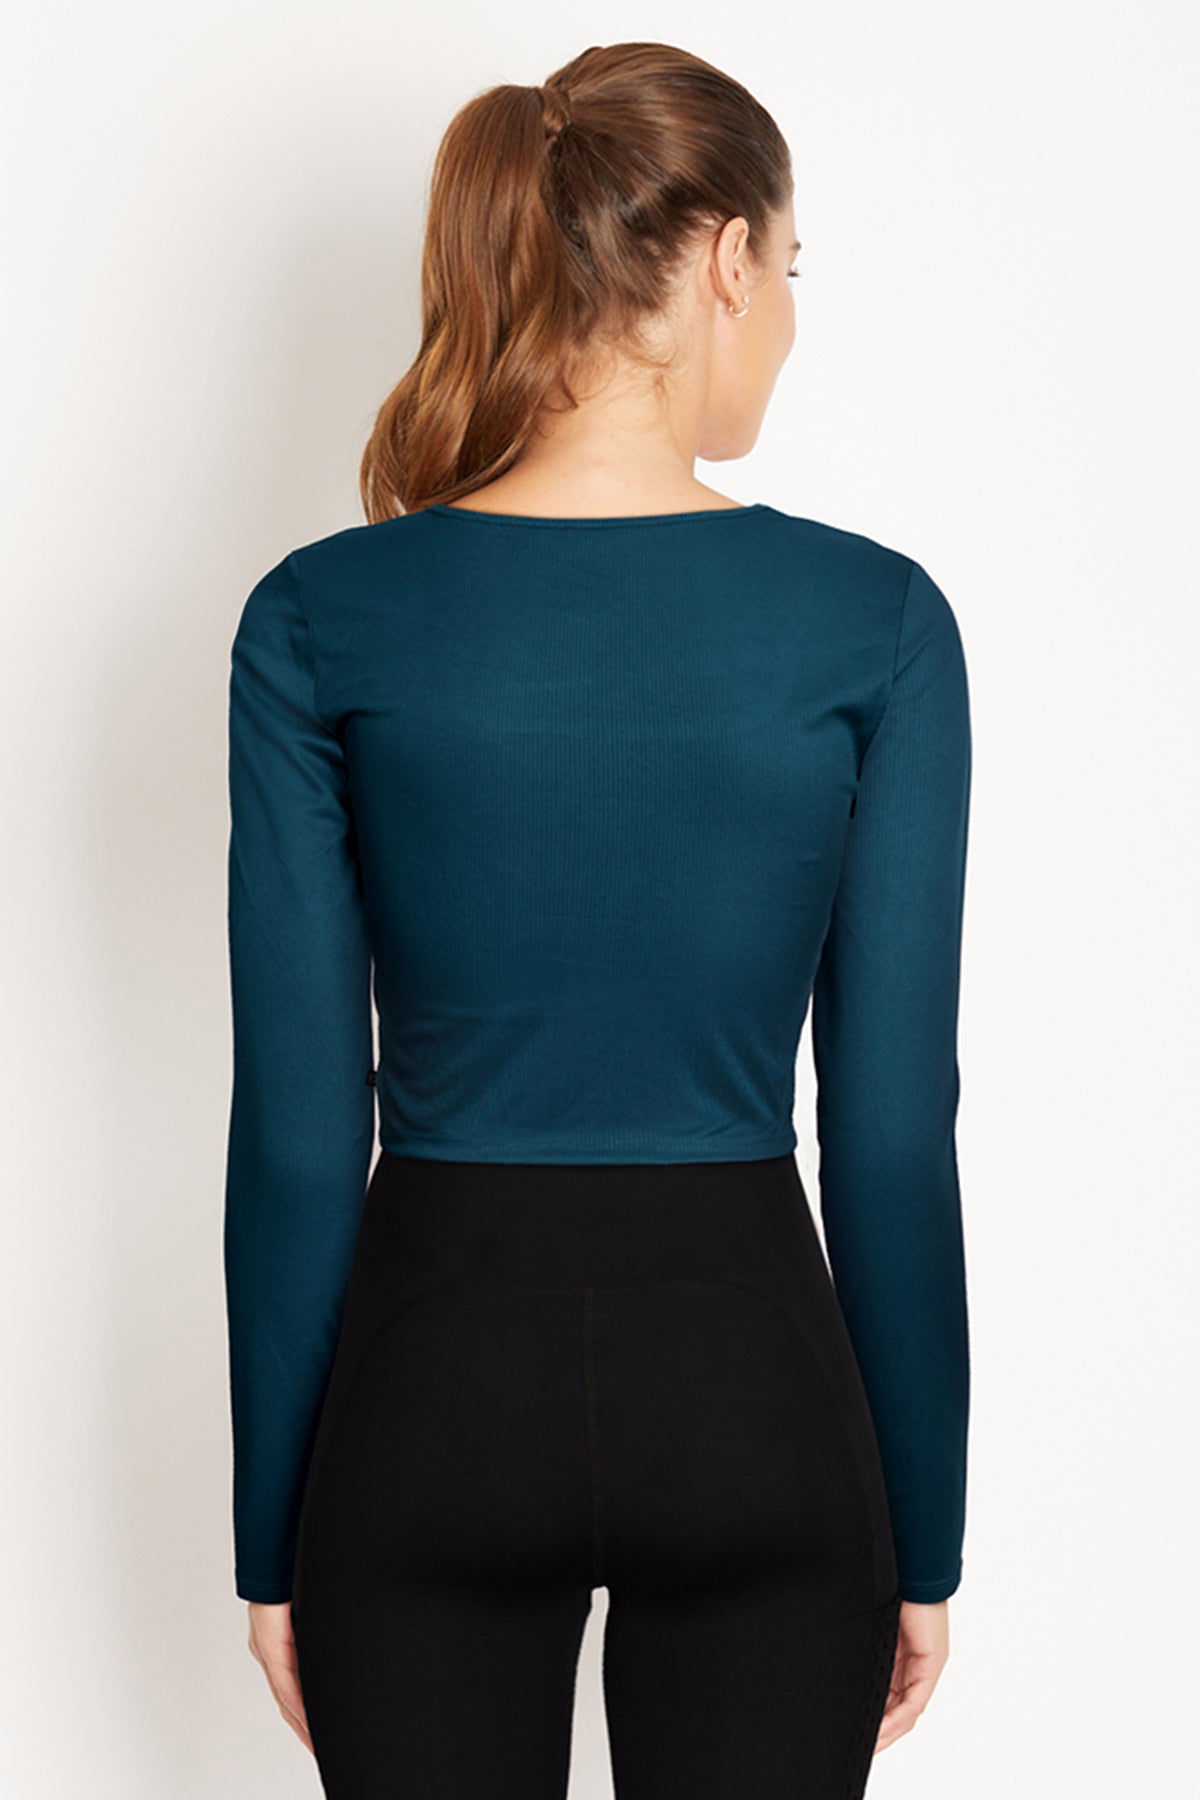 Dyna Long Sleeve Top (Reflecting Pond)